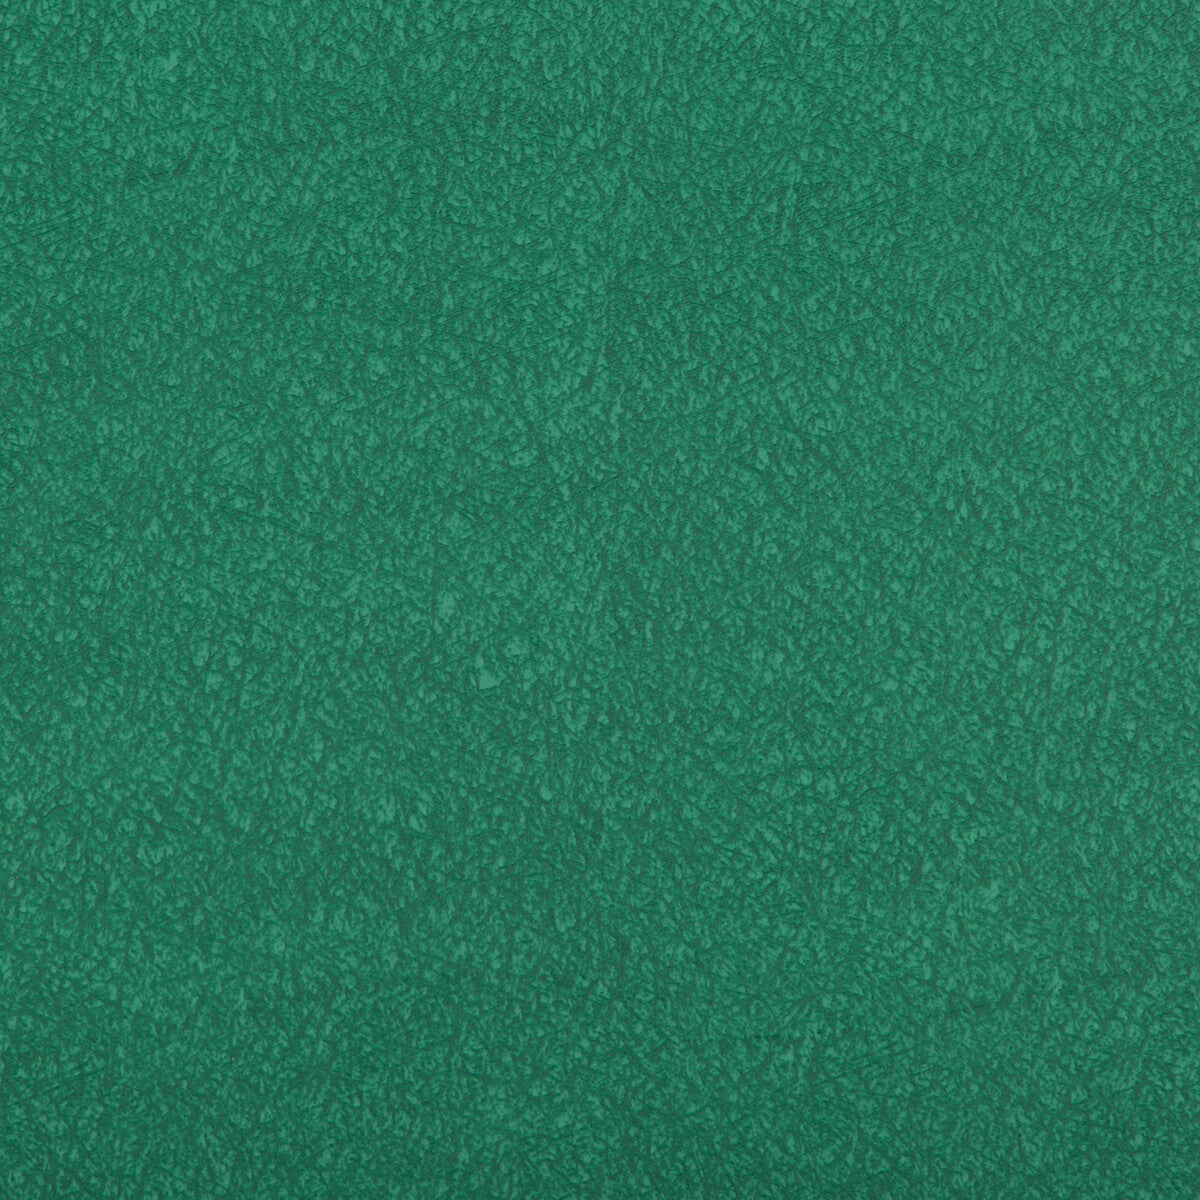 Ames fabric in spearmint color - pattern AMES.335.0 - by Kravet Contract